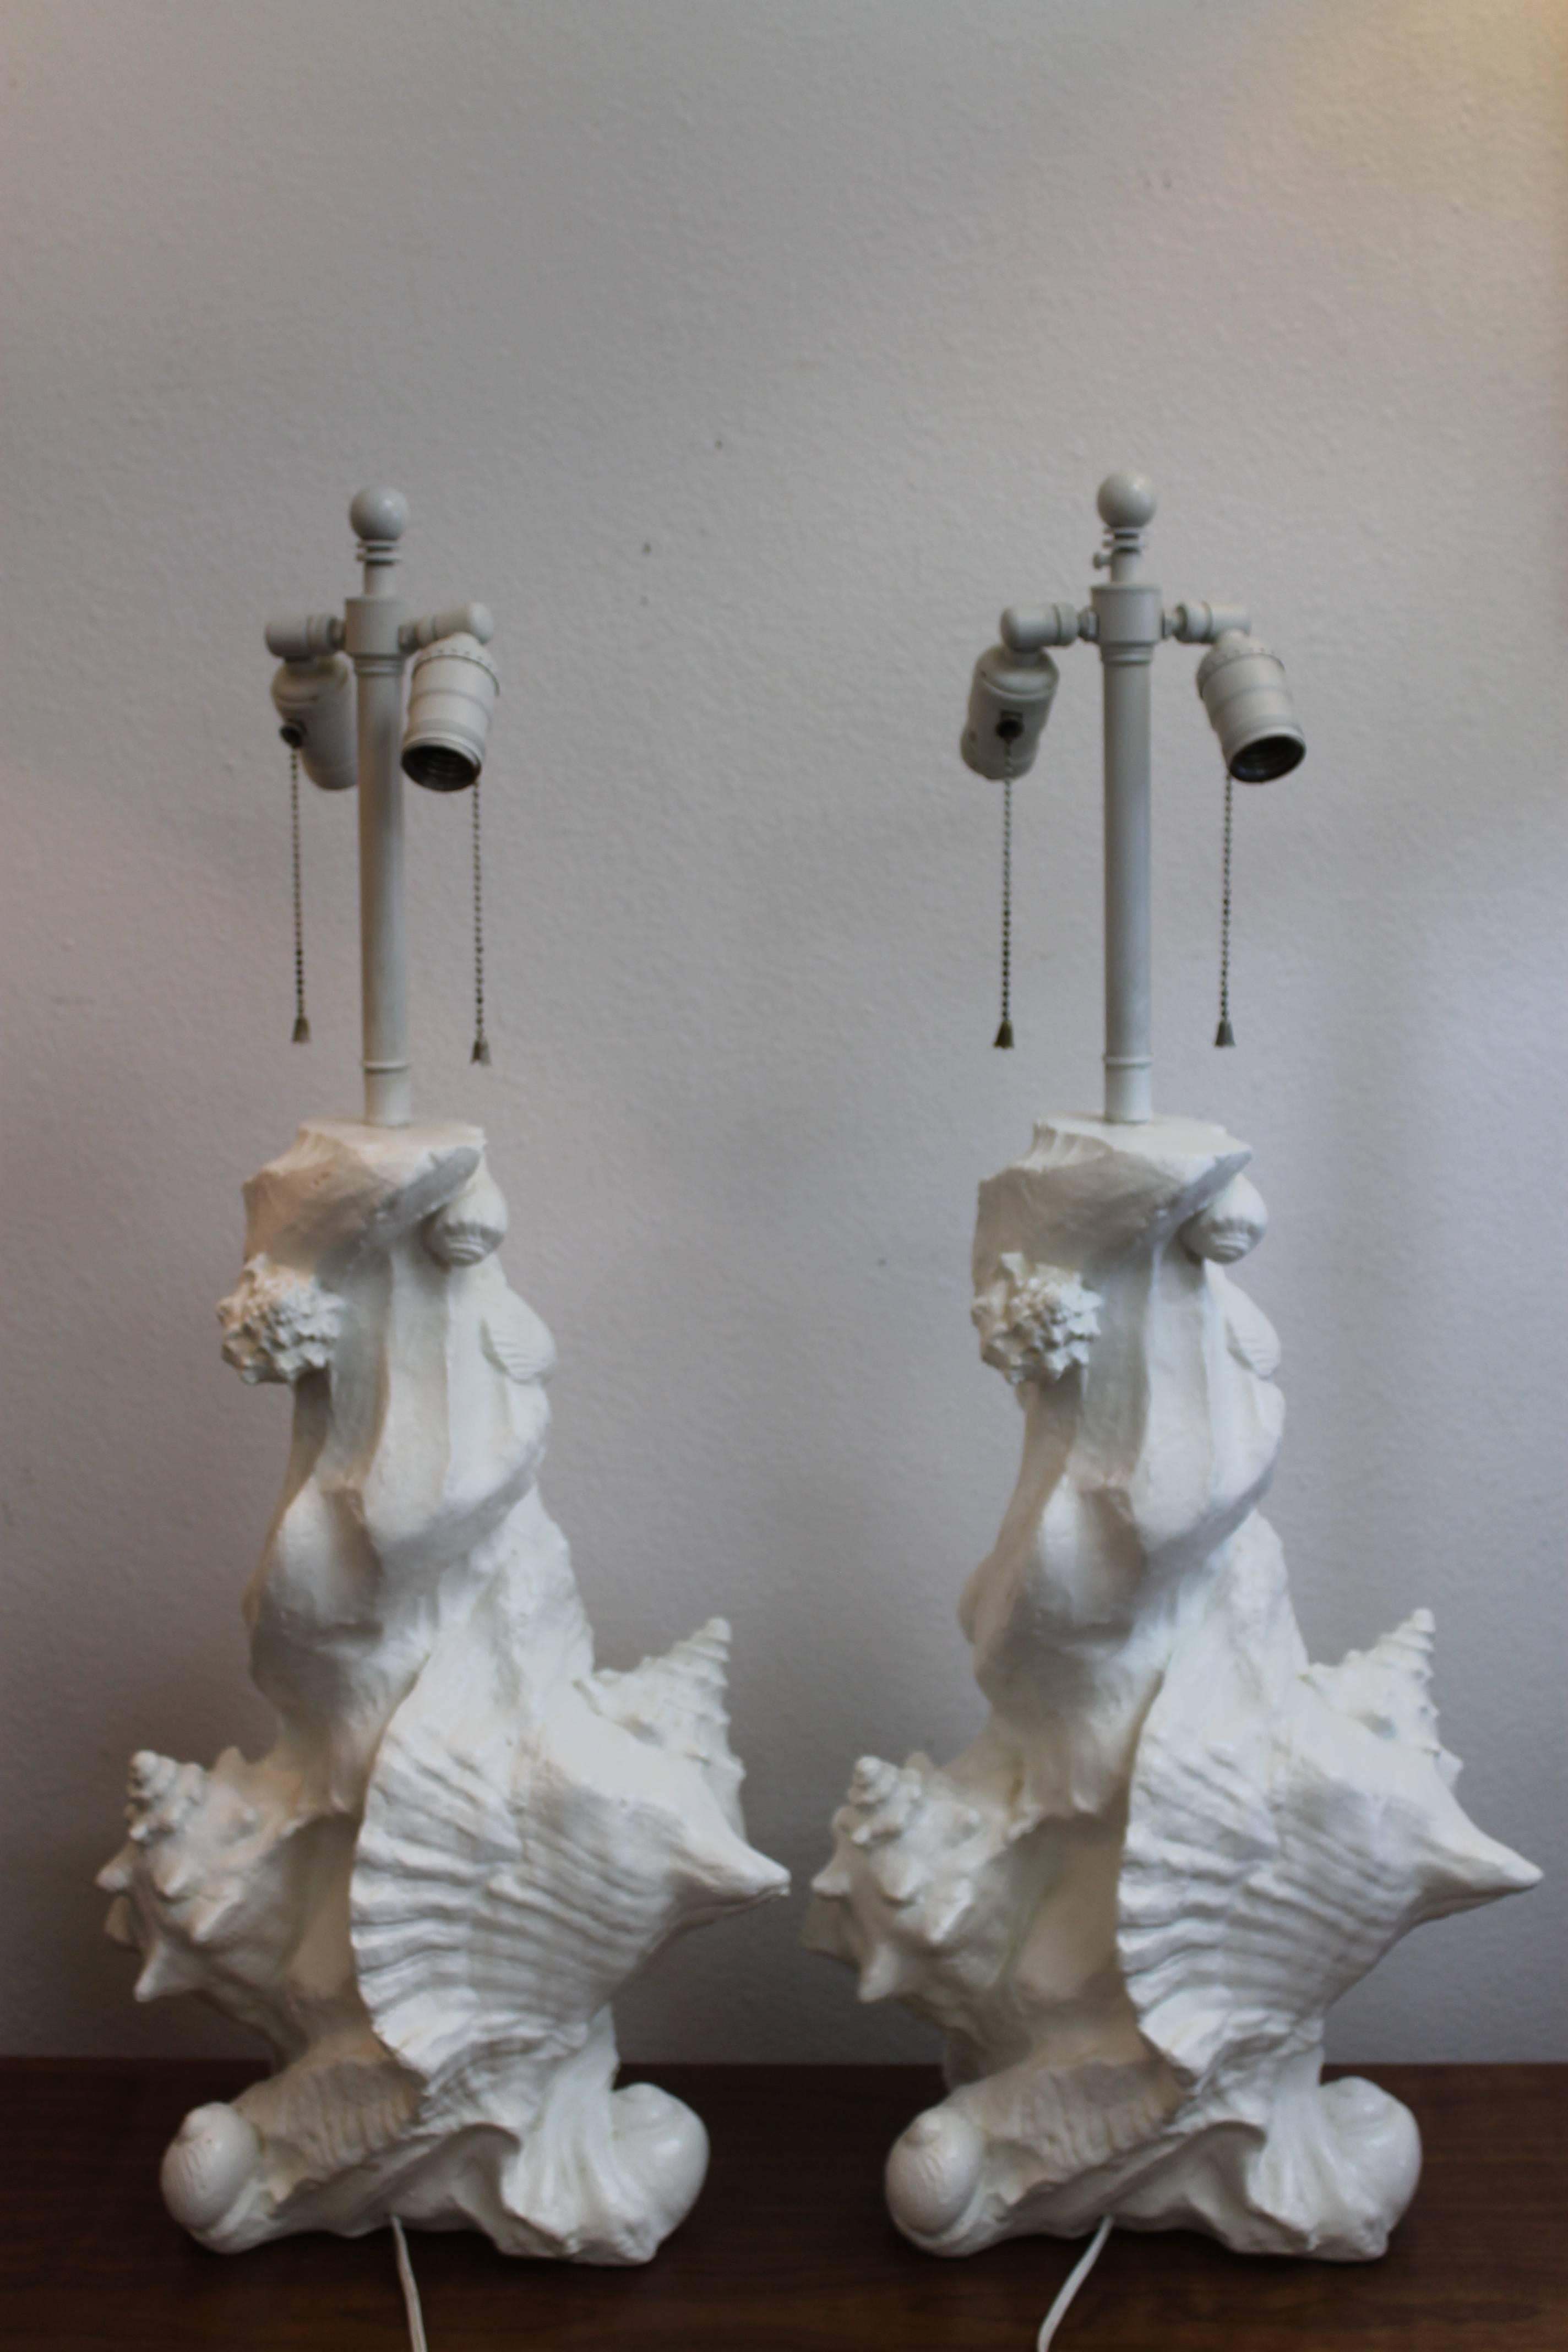 Pair of seashell or nautical lamps attributed to Jacques Grange for Sirmos.  All original including double sockets with adjustable stem harps.  Plaster portions are 19.25